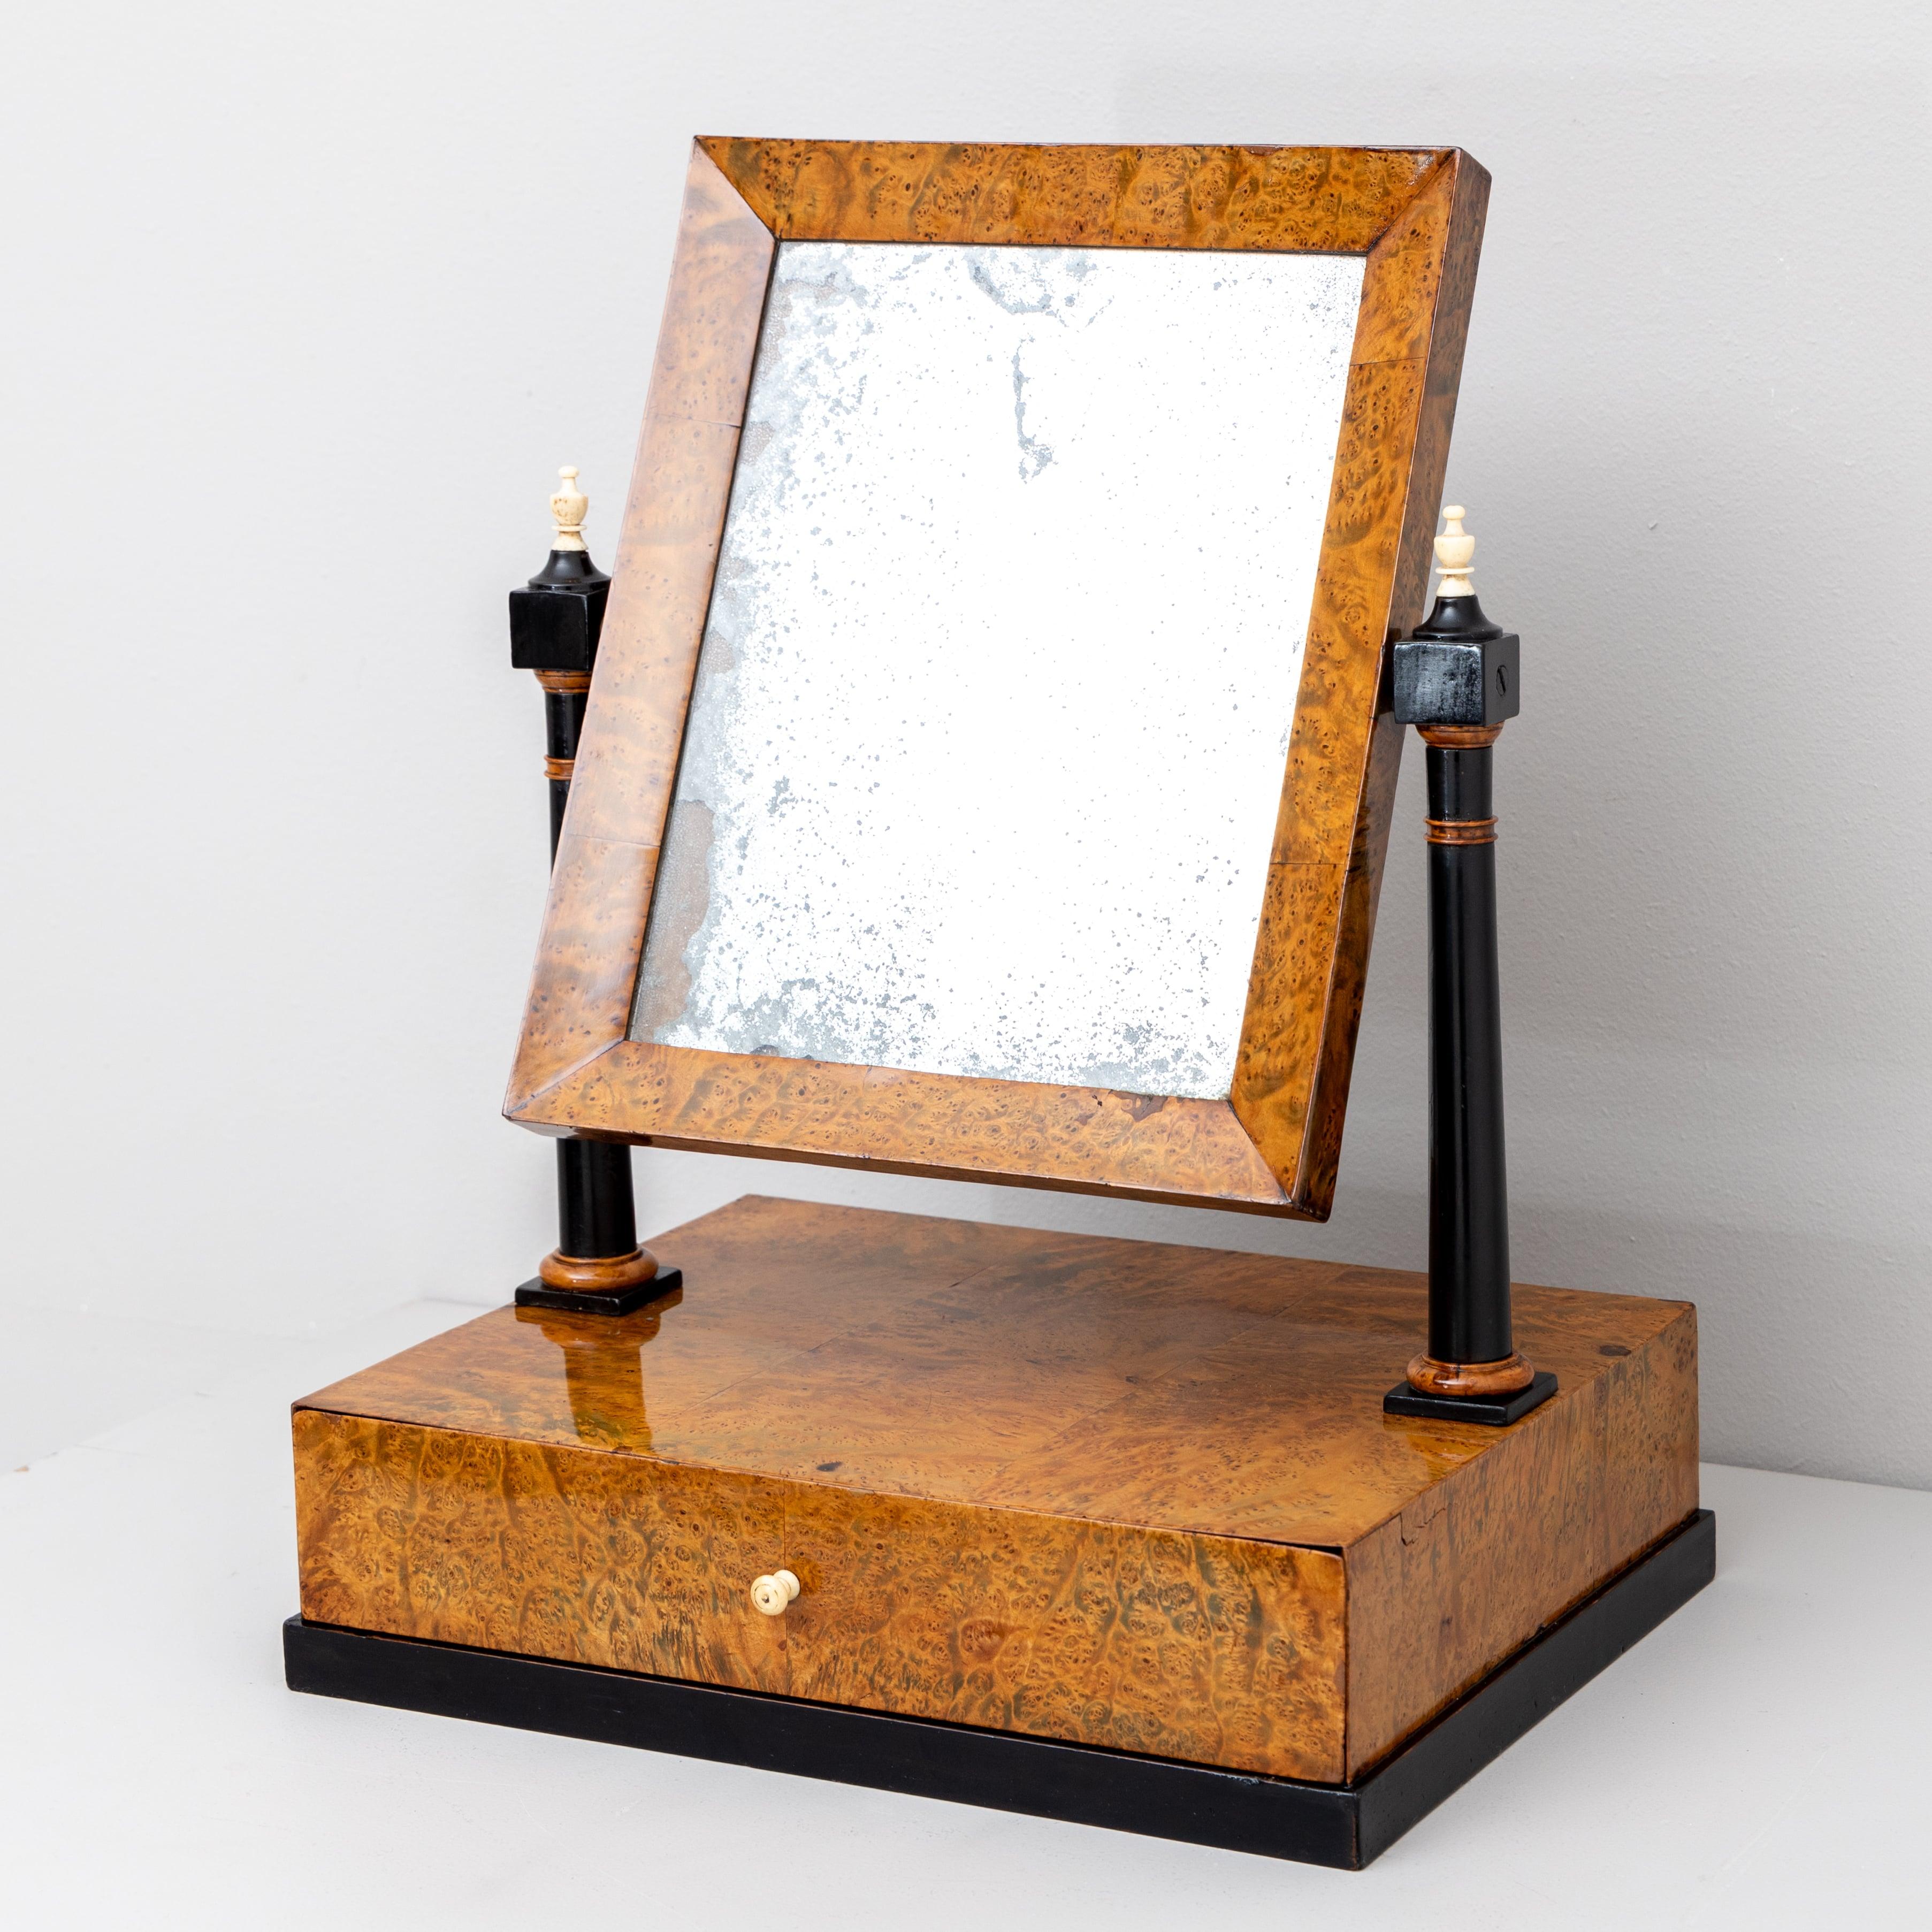 Small table mirror veneered in thuja root with one drawer and tilting rectangular mirror. The mirror is supported by two ebonised columns. The old mirror glass is blind in places.